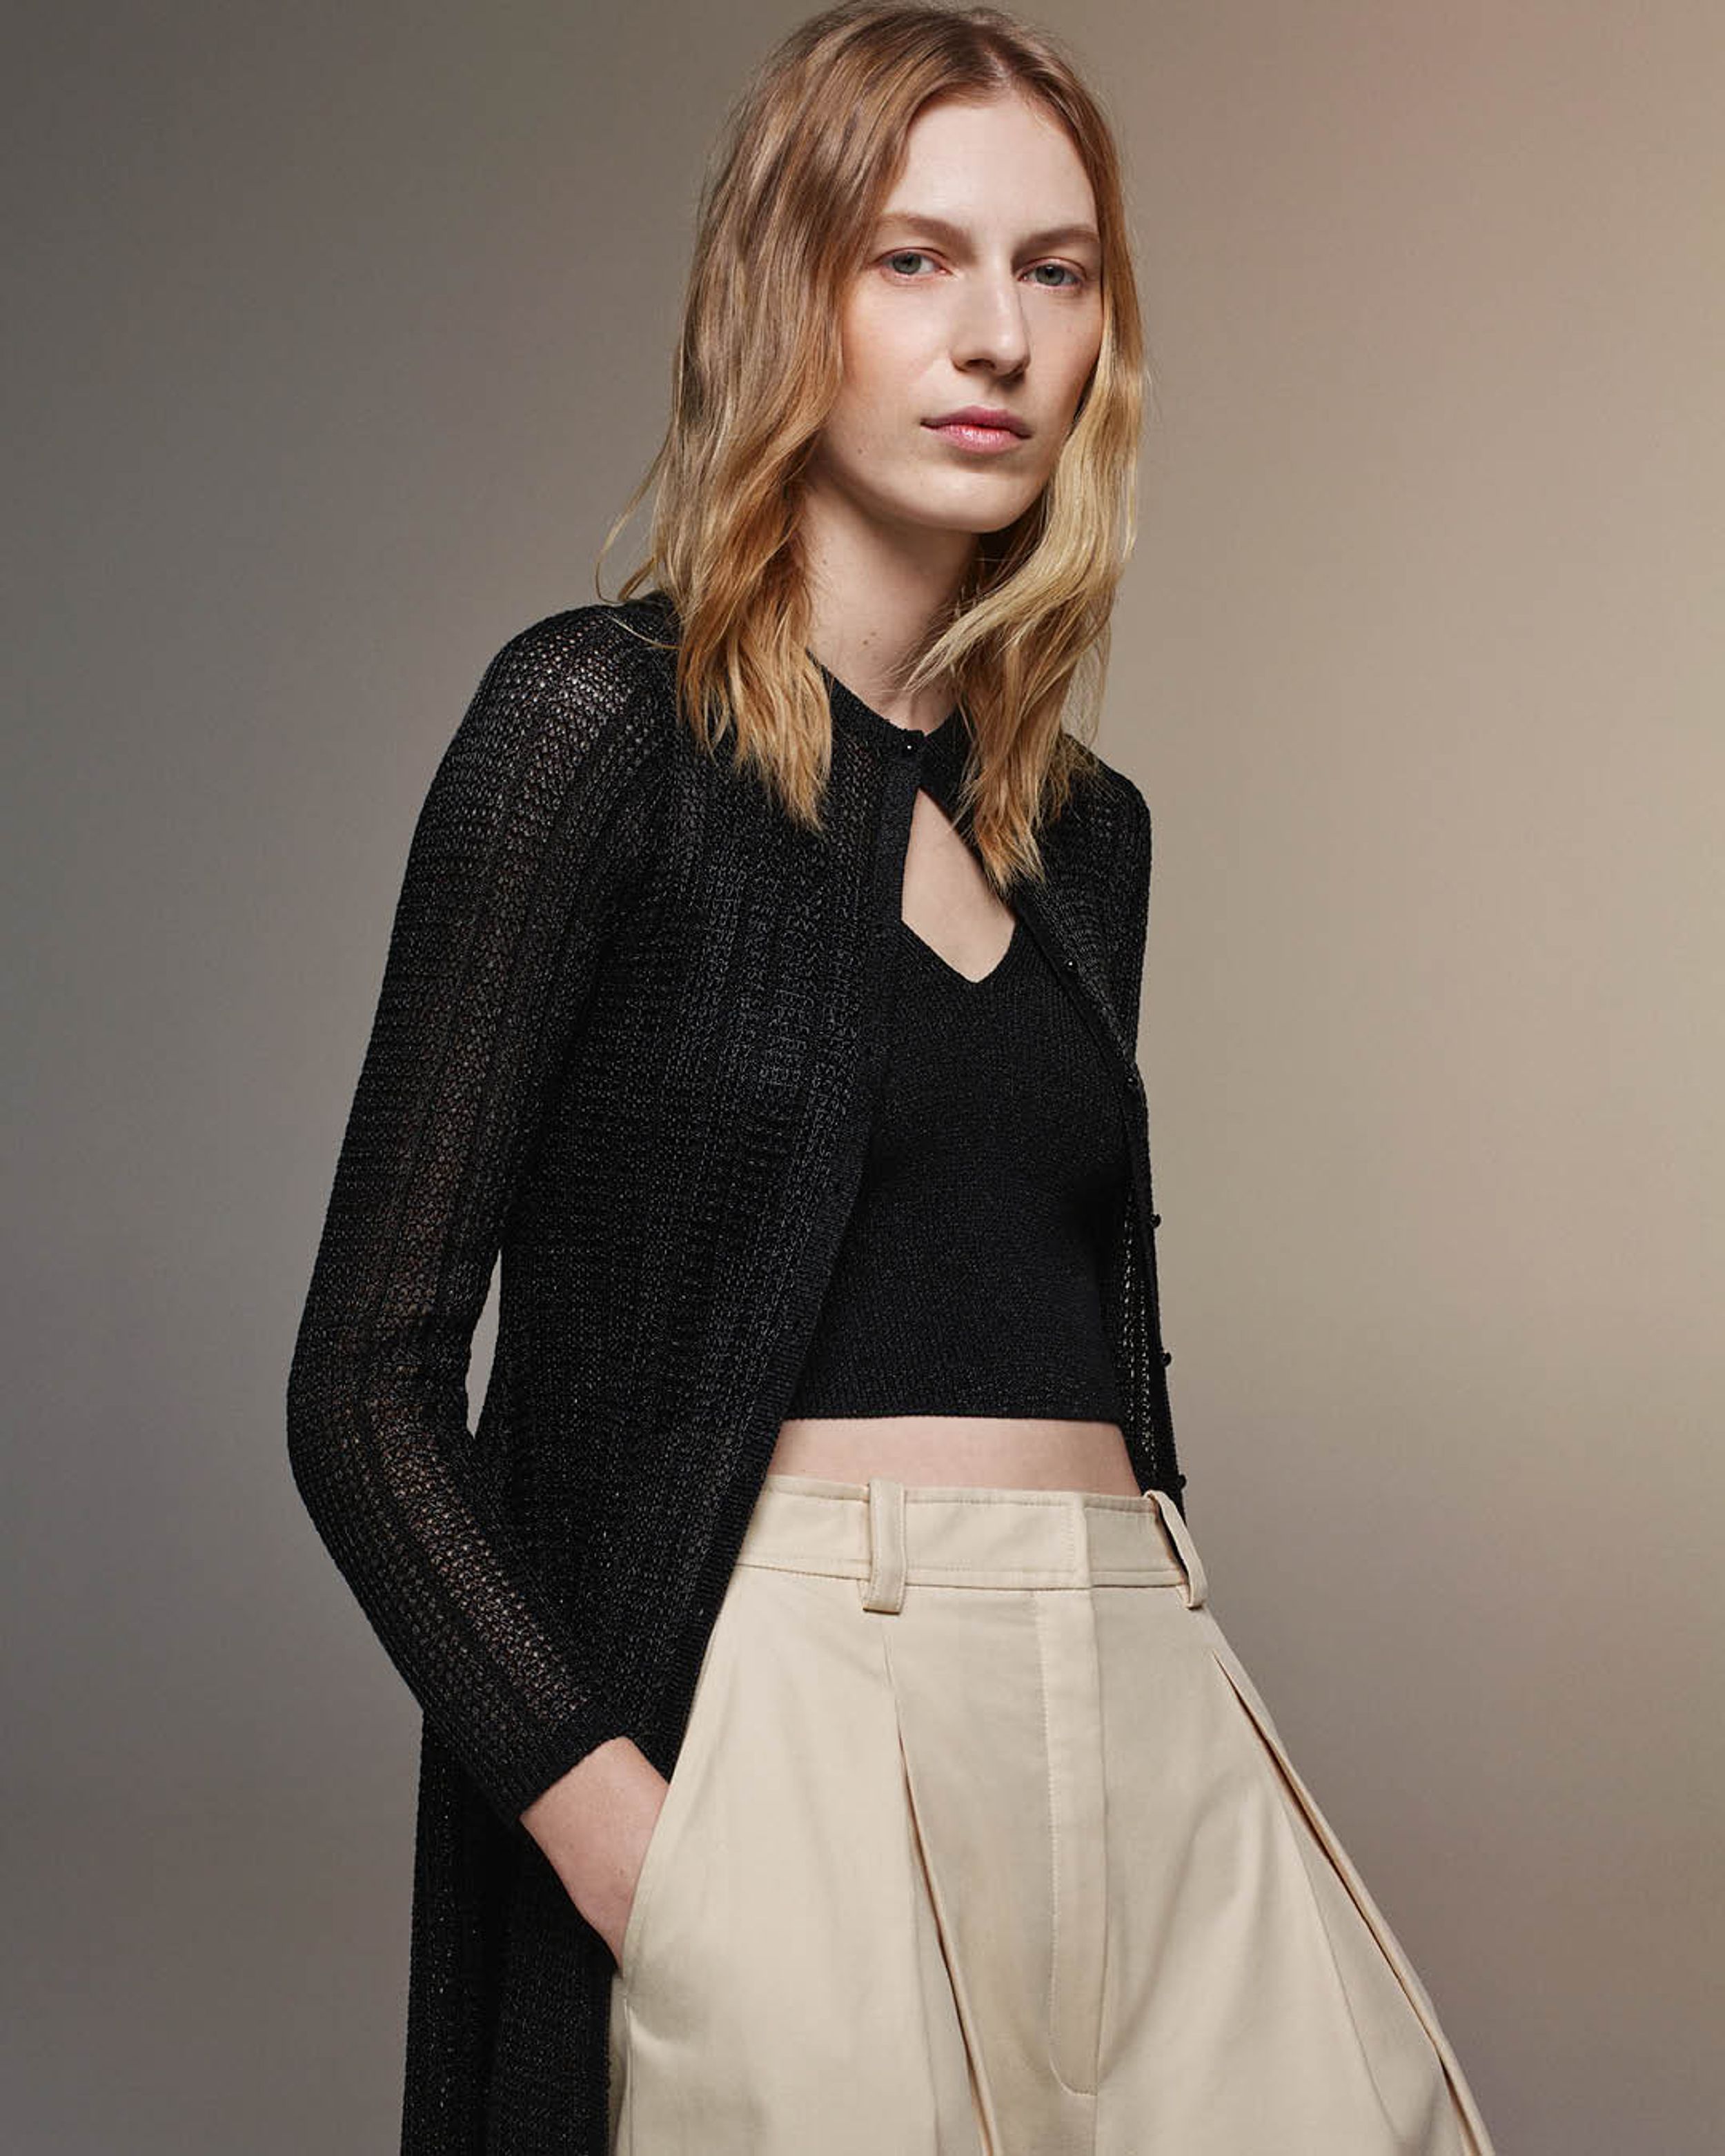 Julia Nobis wearing a matching black singlet and cardigan with beige trousers